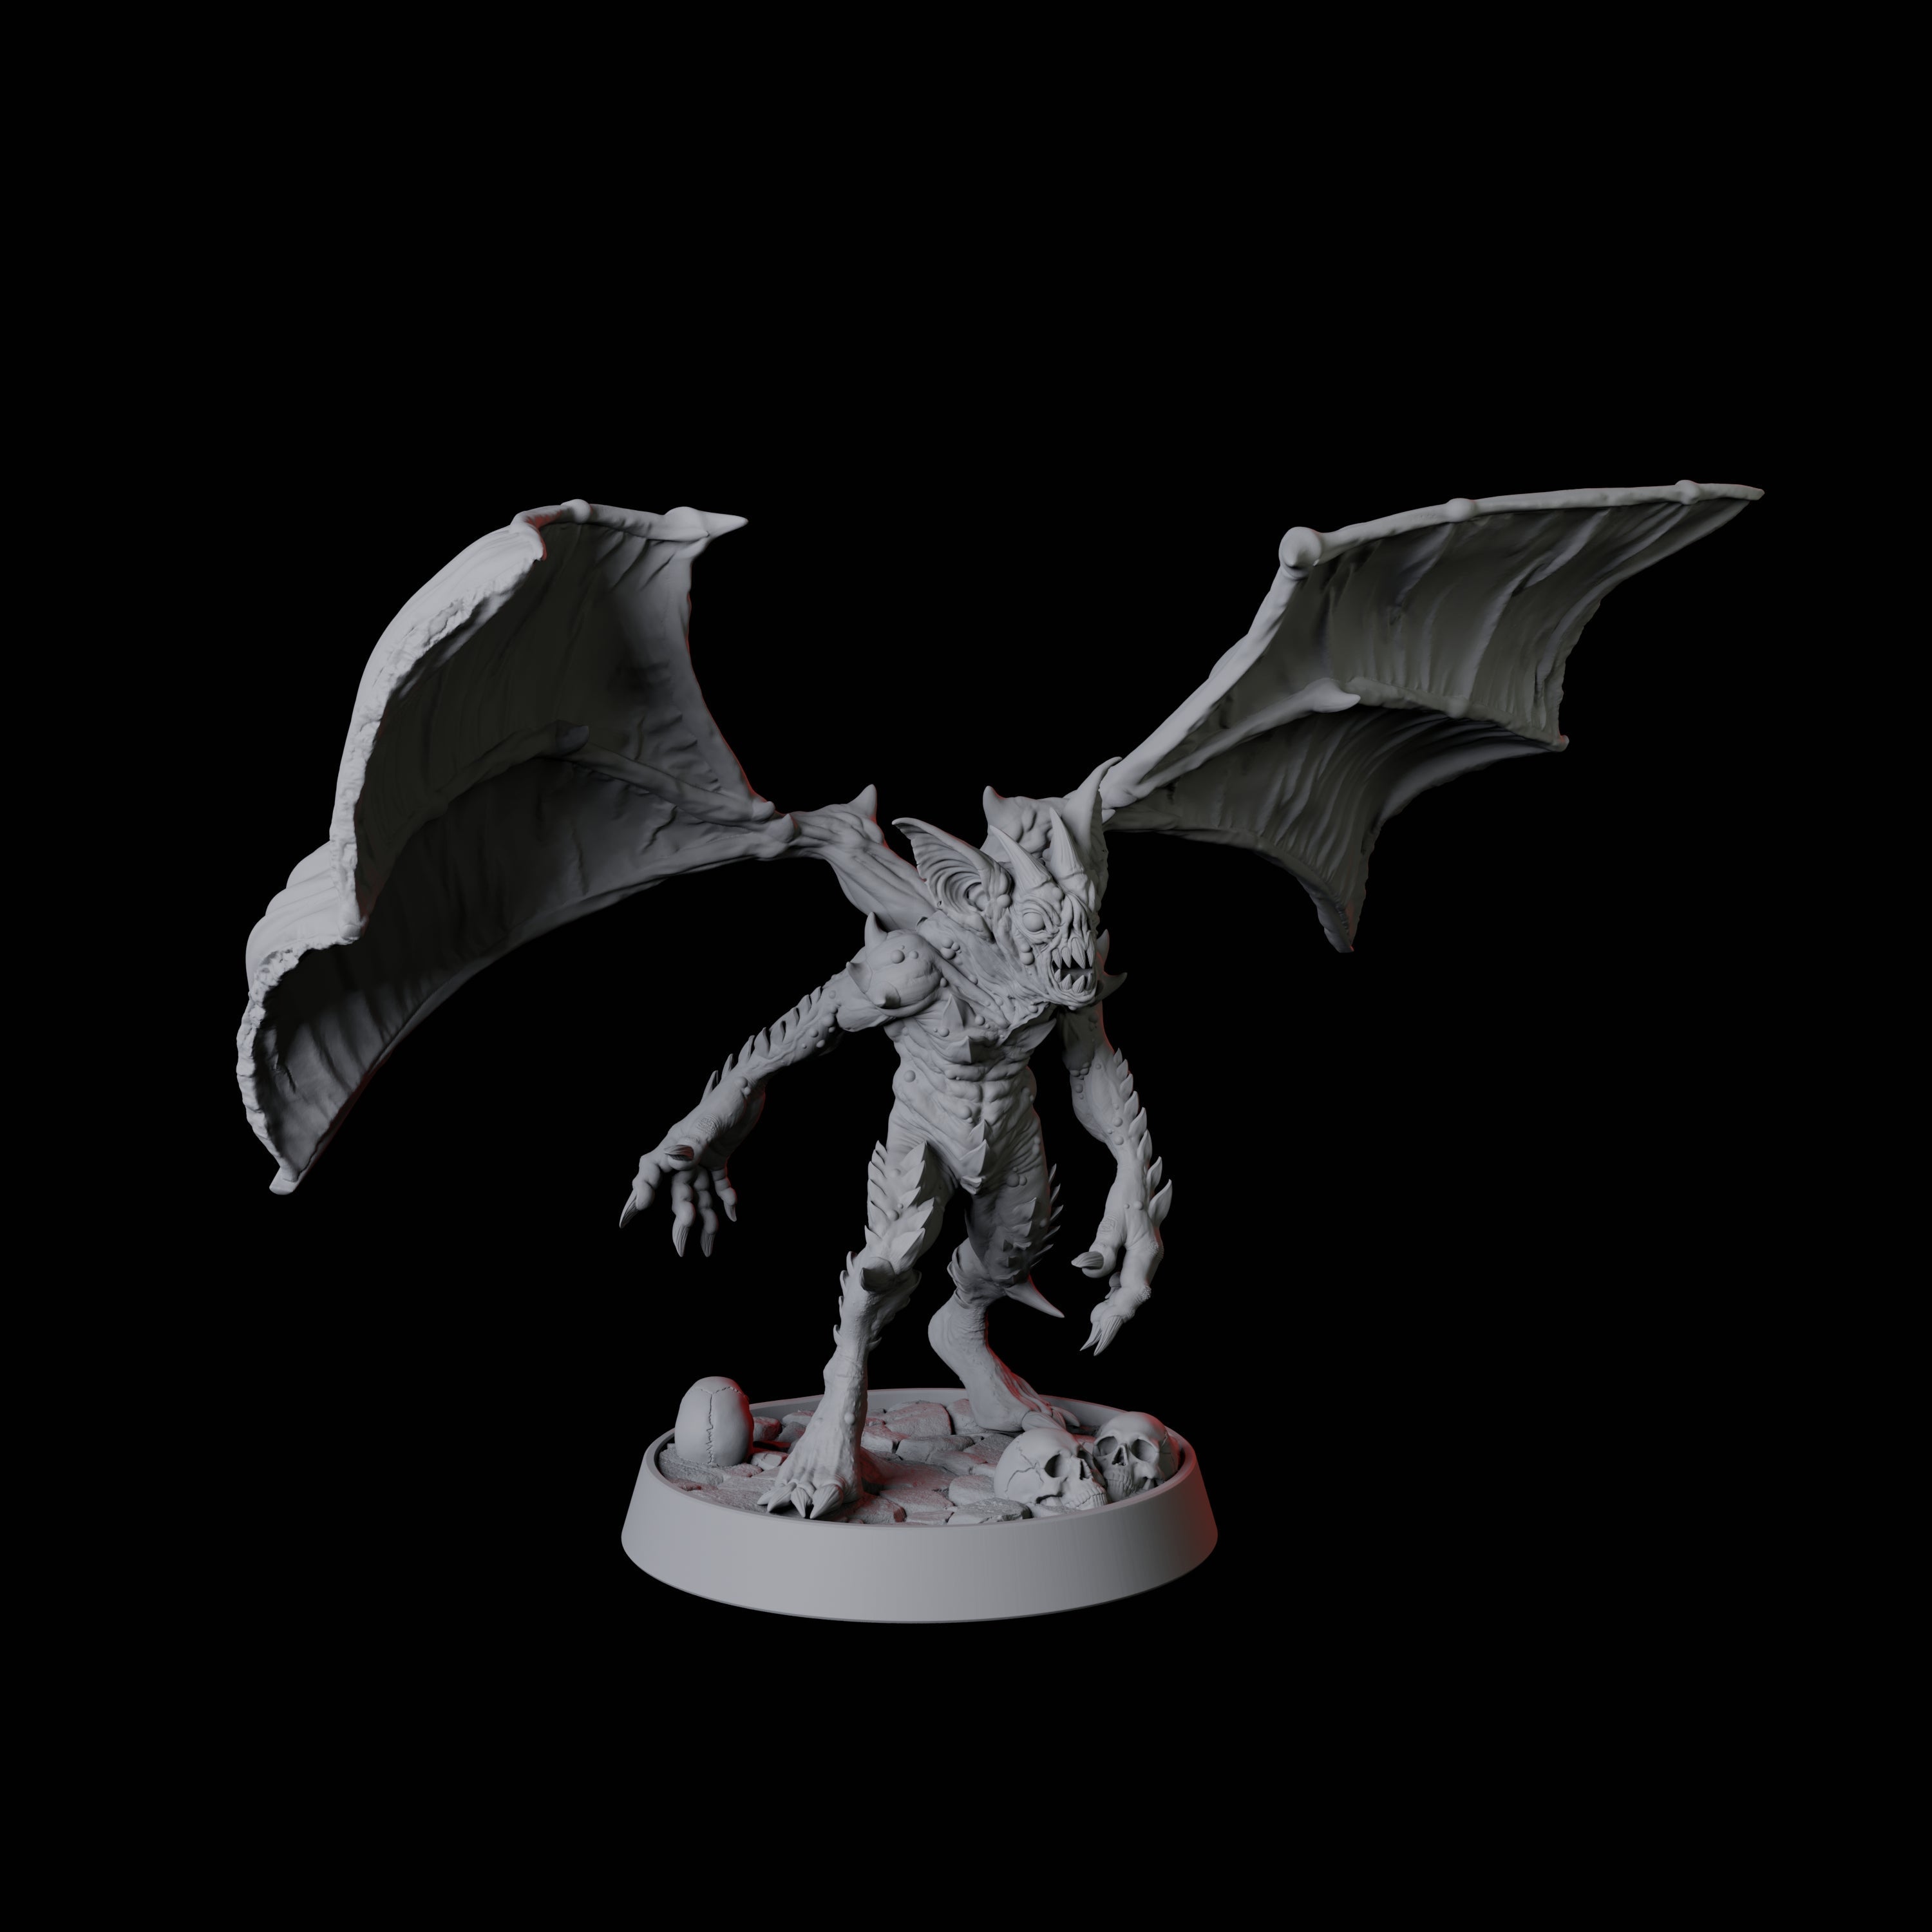 Flying Spined Devil Miniature for Dungeons and Dragons